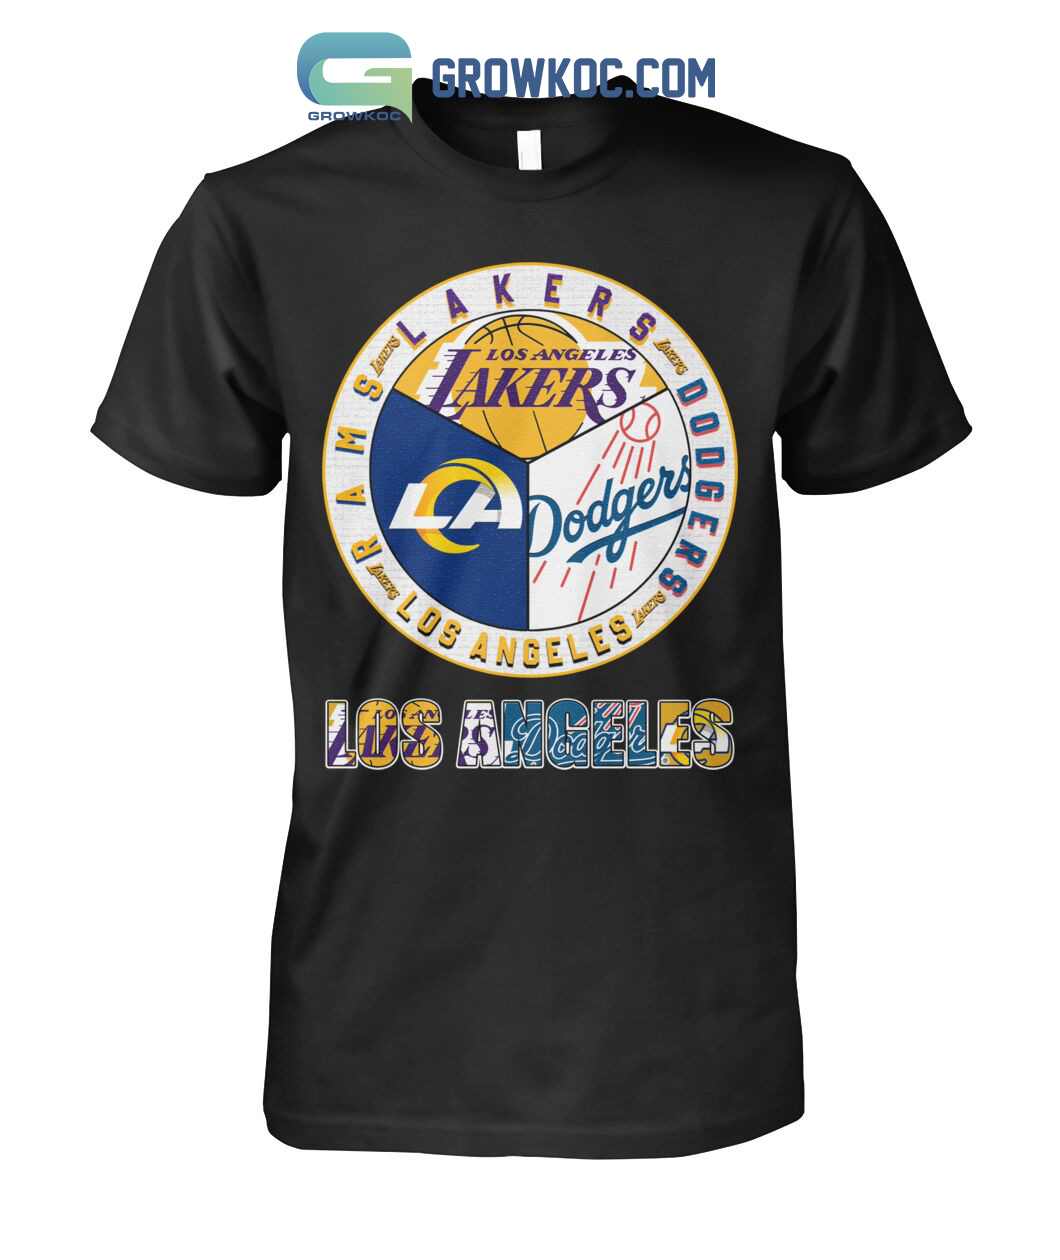 Dodgers Los Angeles Lakers and Rams los Angeles city of champion shirt,  hoodie, sweater and long sleeve